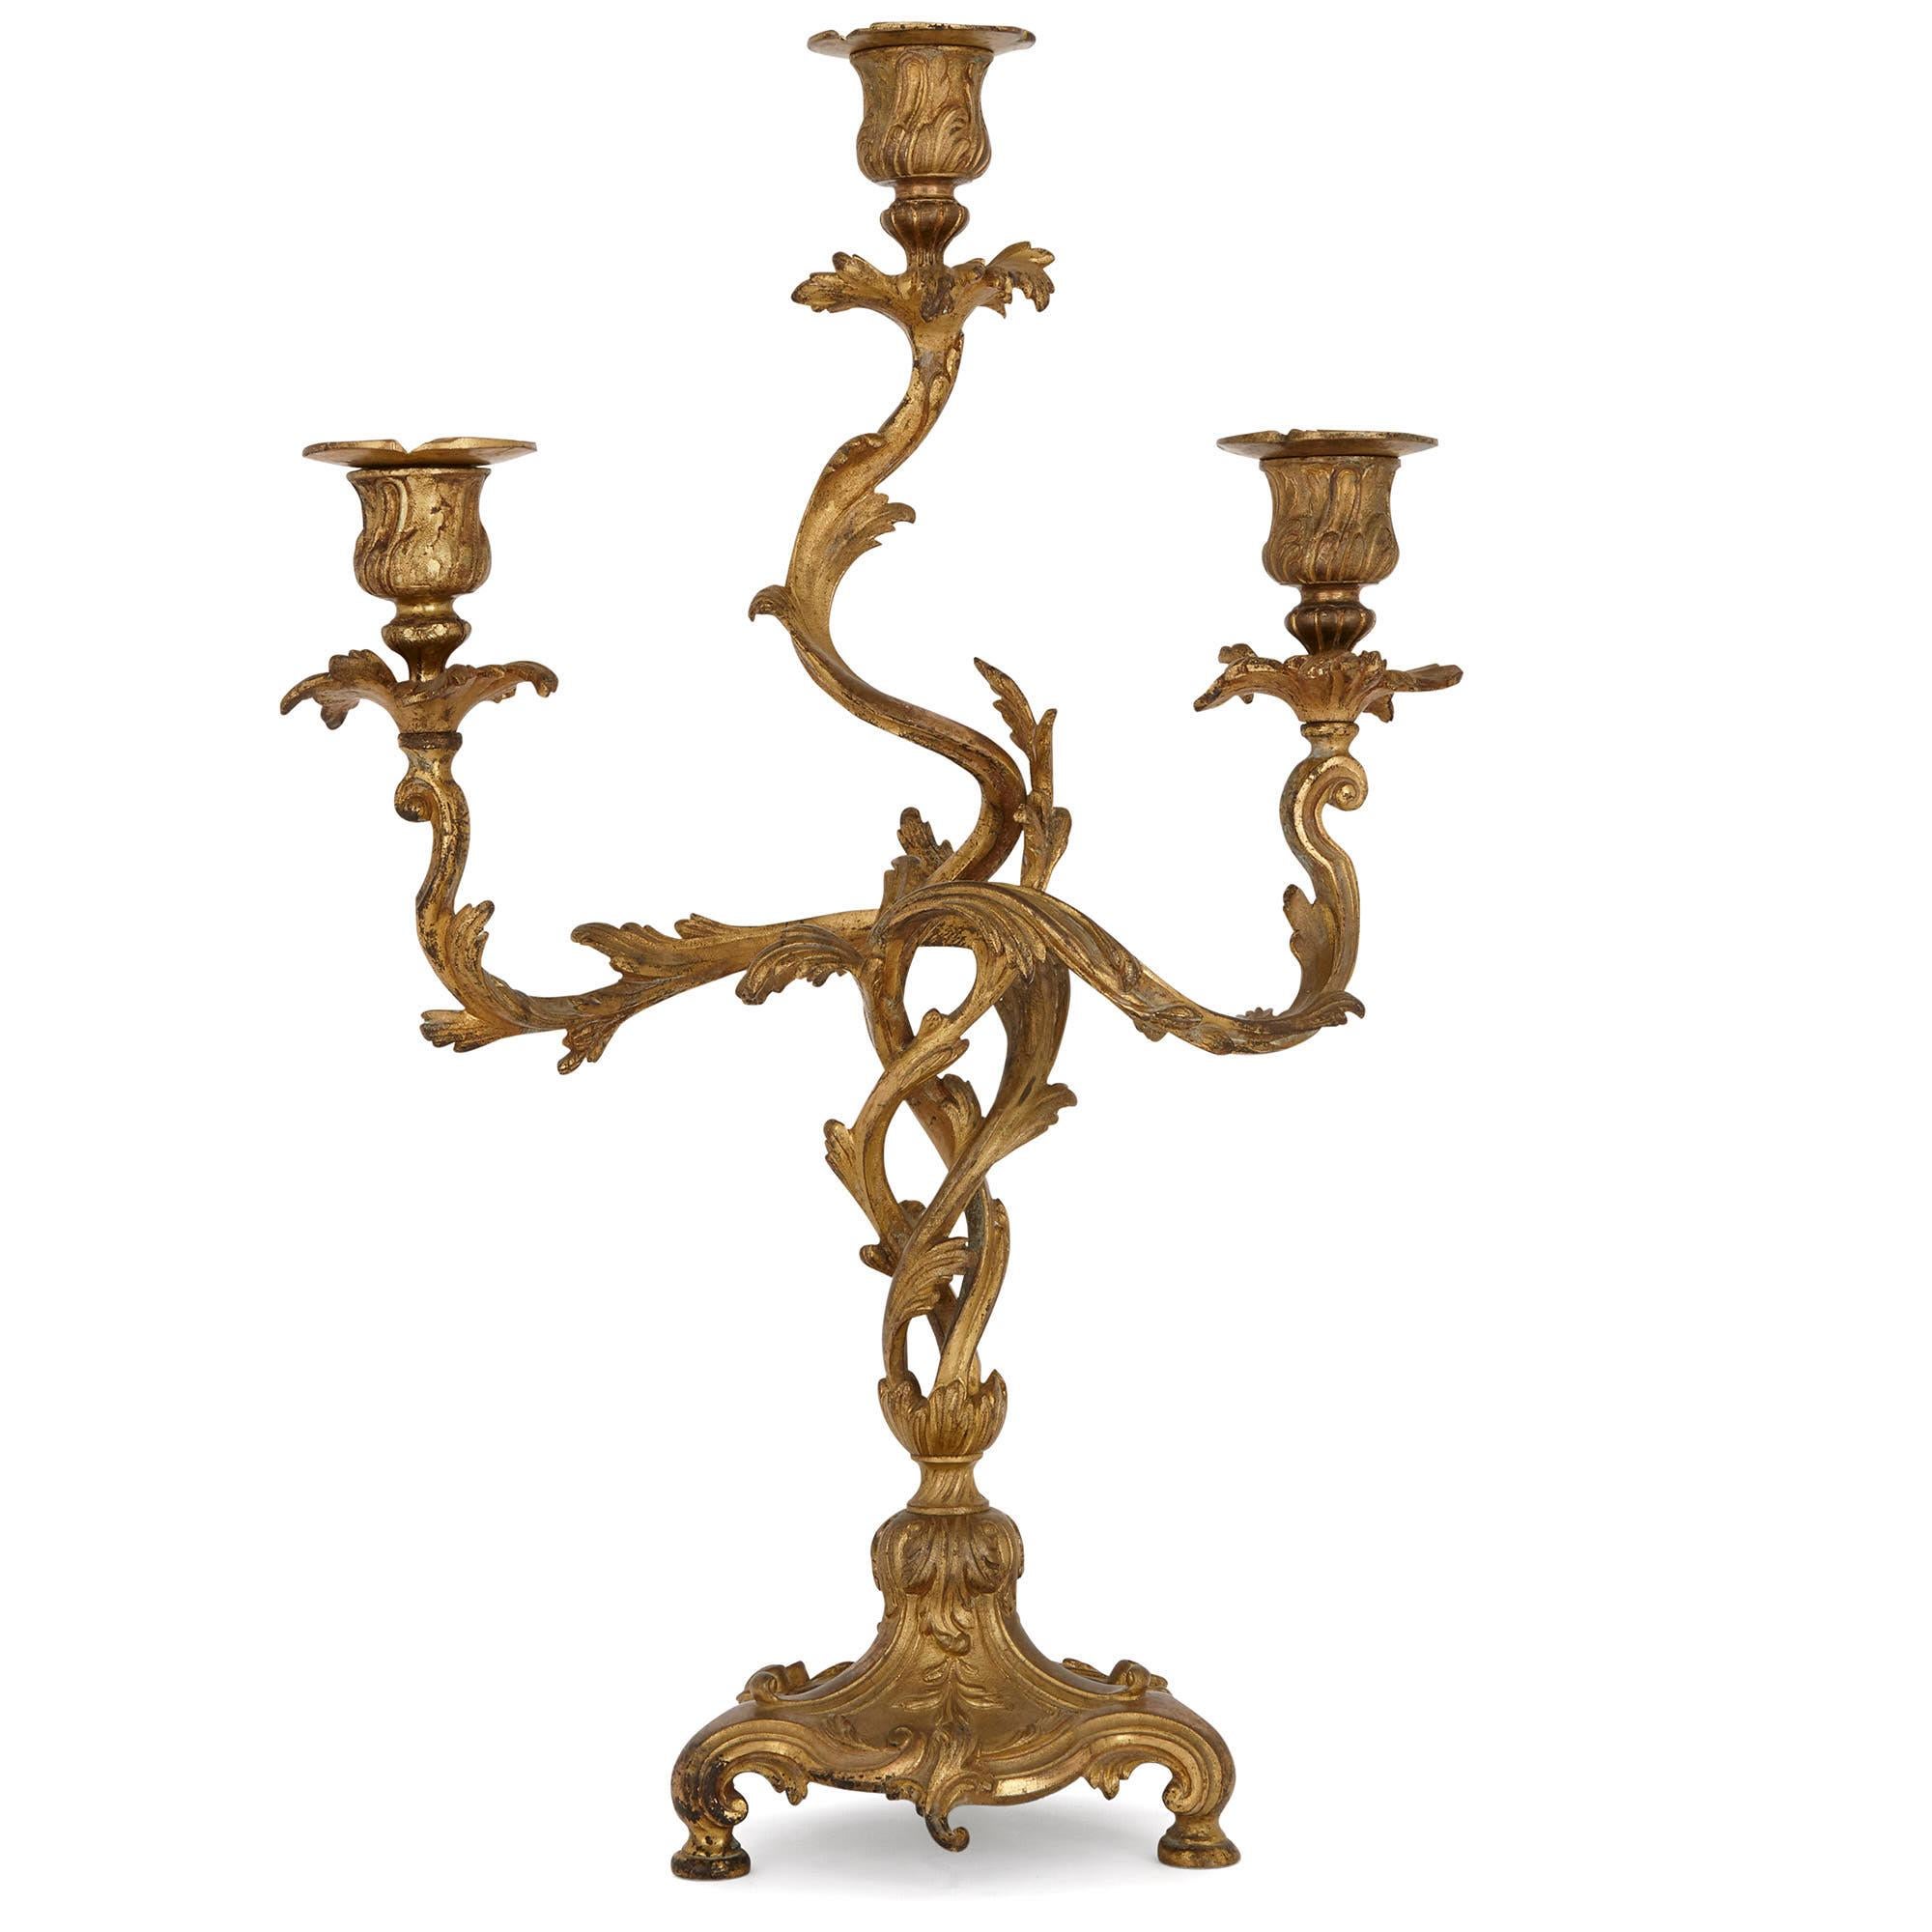 These beautiful gilt bronze (ormolu) candelabra are designed in a Rococo style, after decorative arts of the Louis XV period (1715-1774). The candelabra display many characteristics of the Rococo style, including elegance, organic sinuosity and